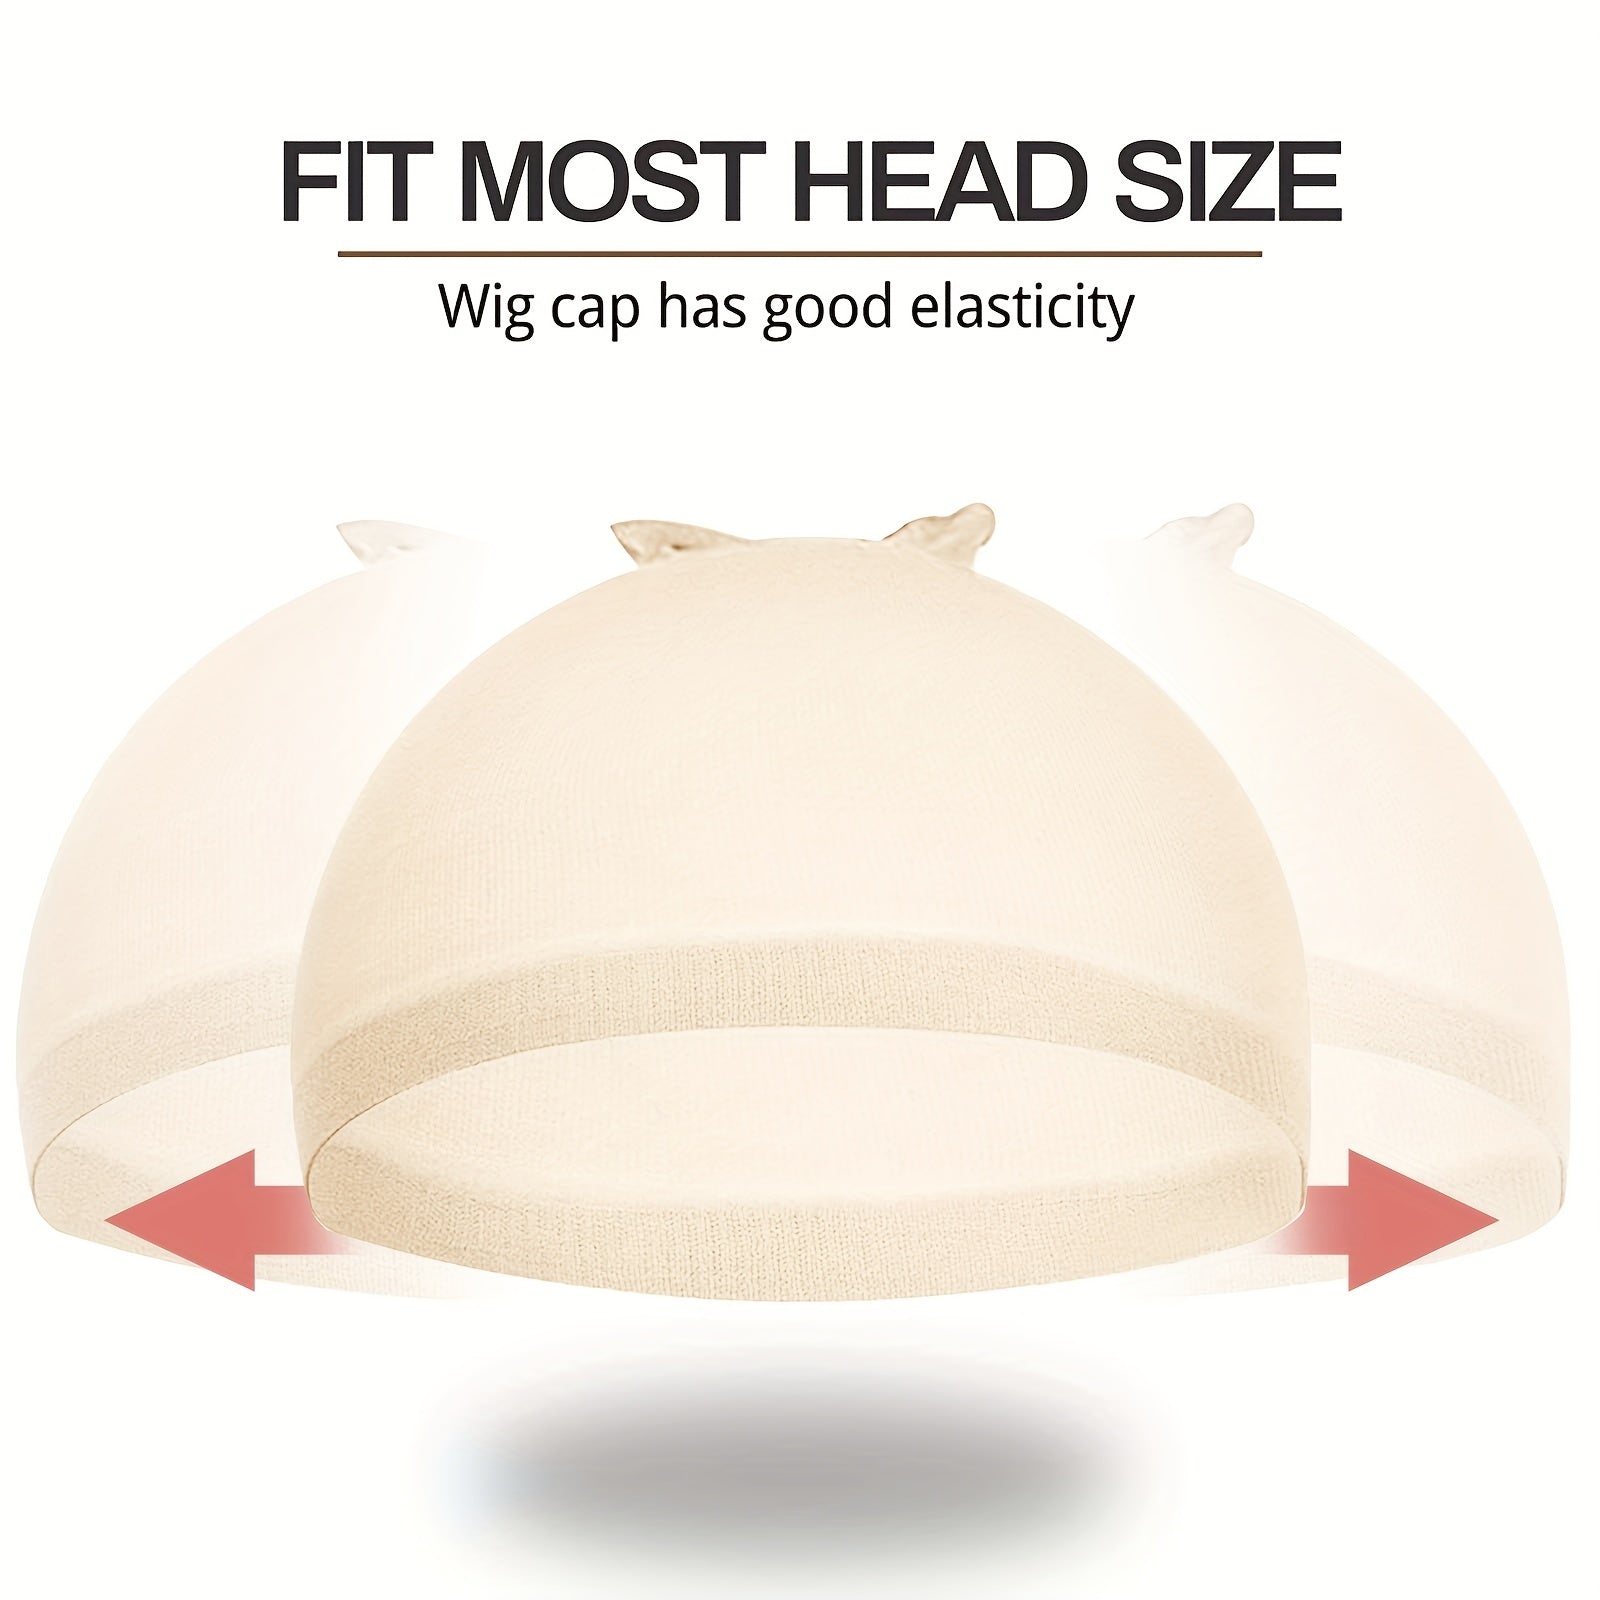 4pcs HD Wig Cap Elastic Breathable Invisible Wig Caps Perfect For Professional Use